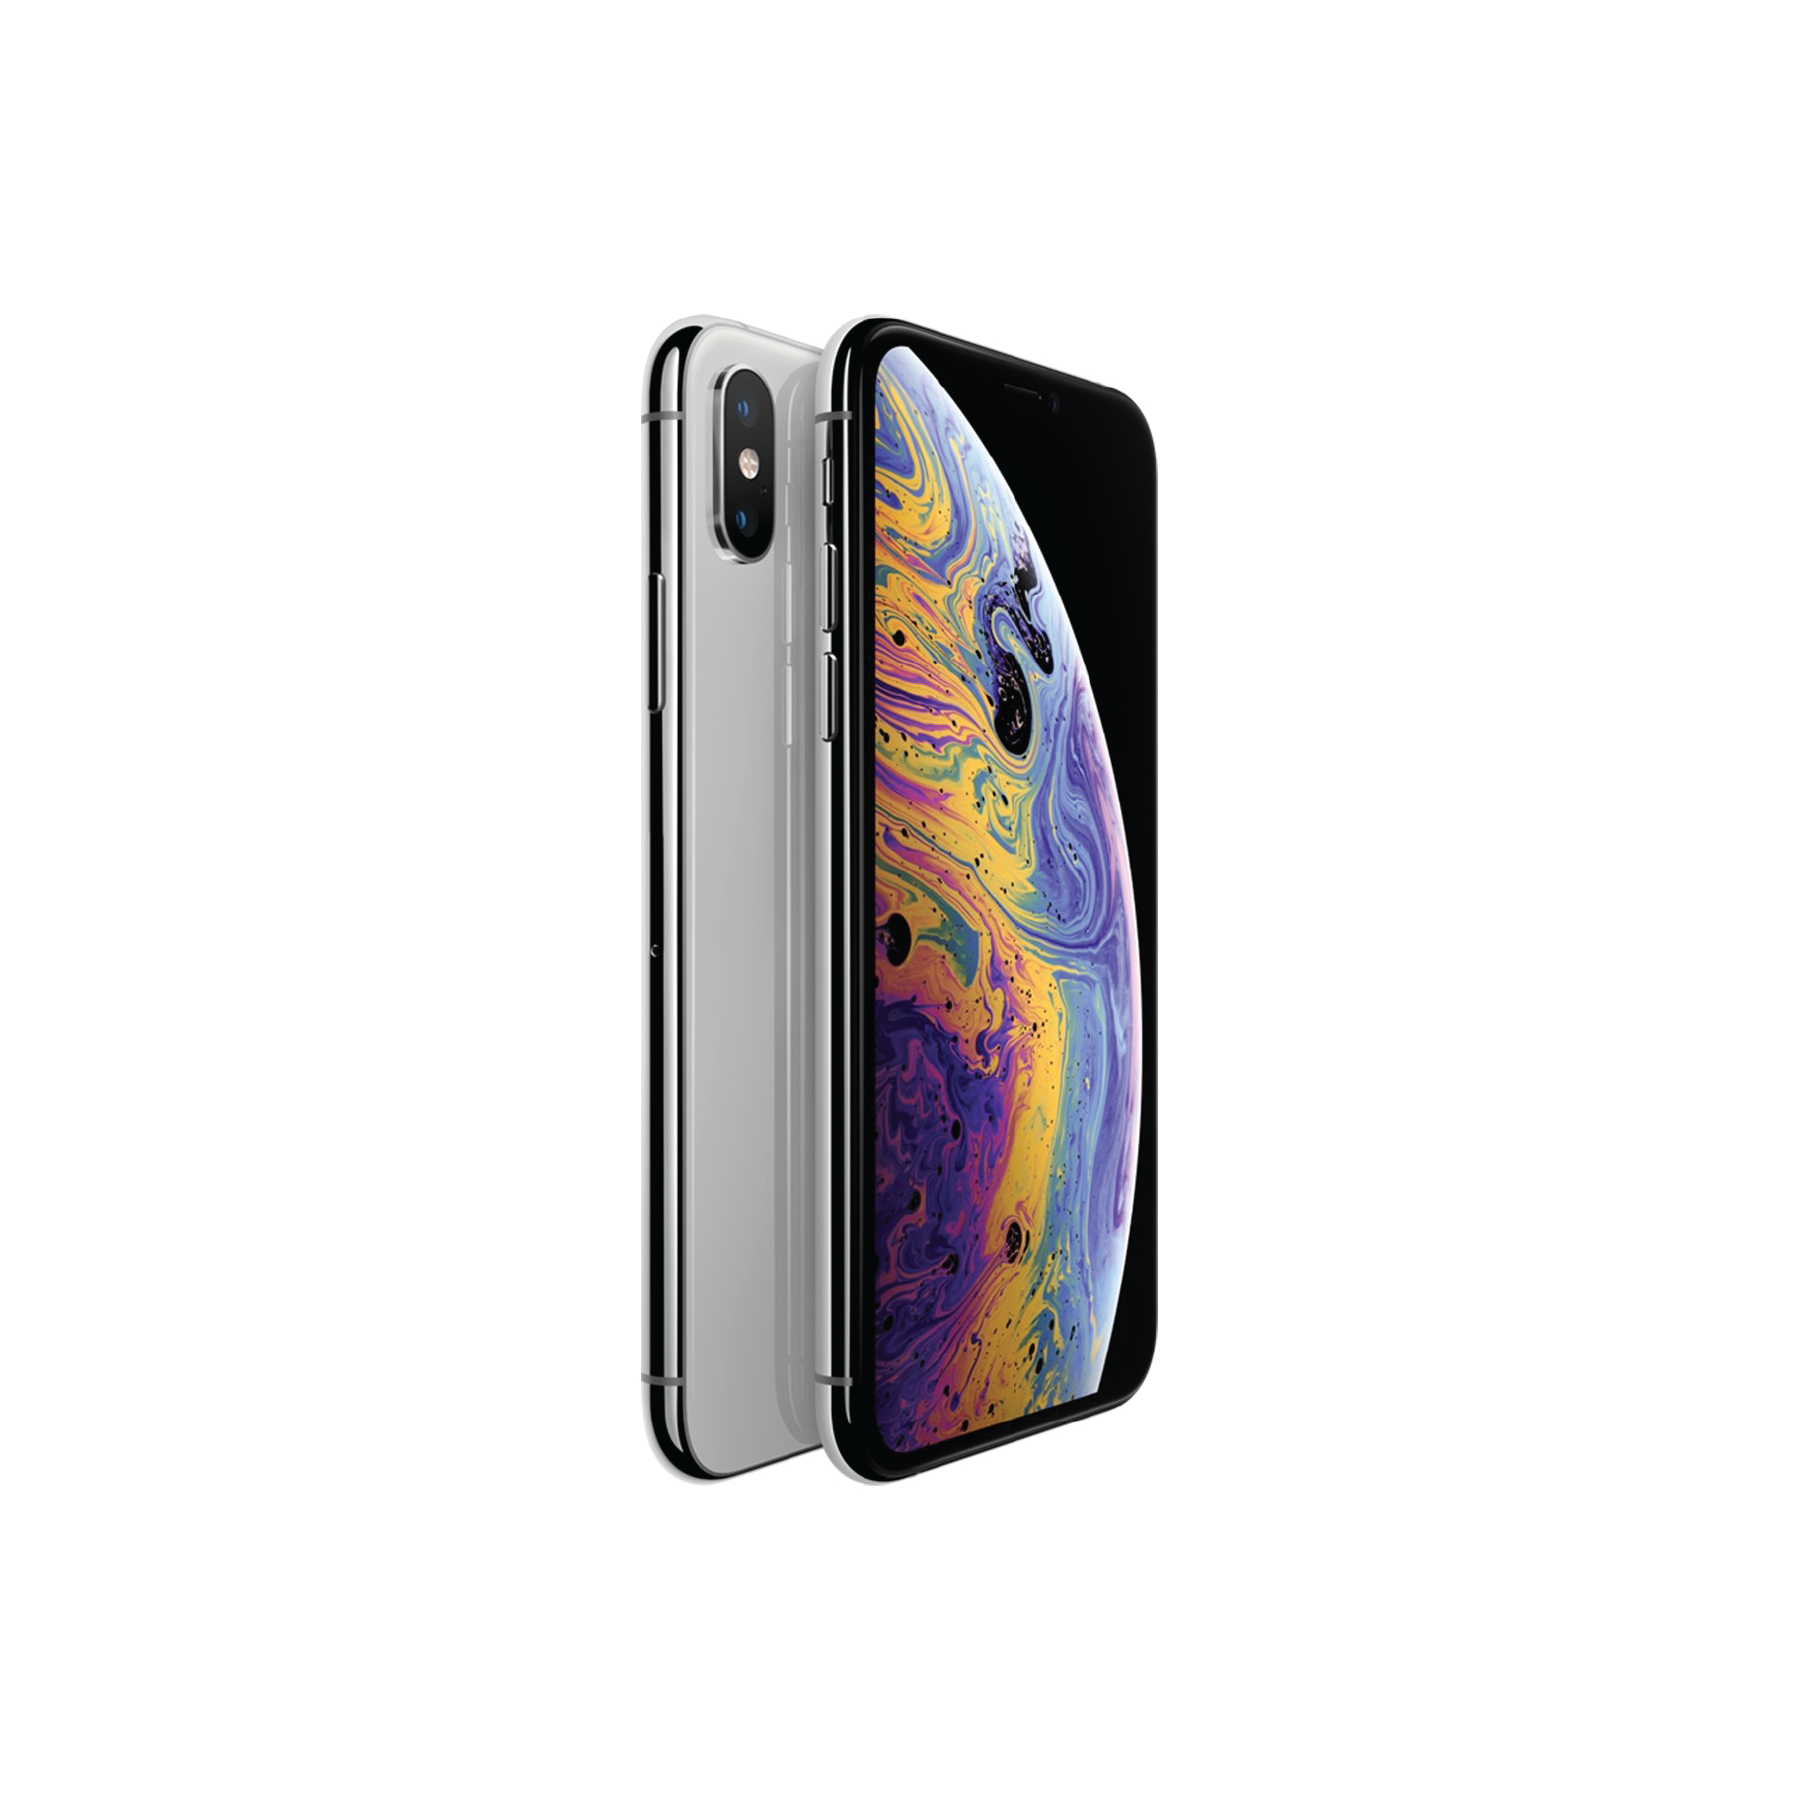 iPhone XS Max 256GB - Silver (Better) - iStore Pre-owned